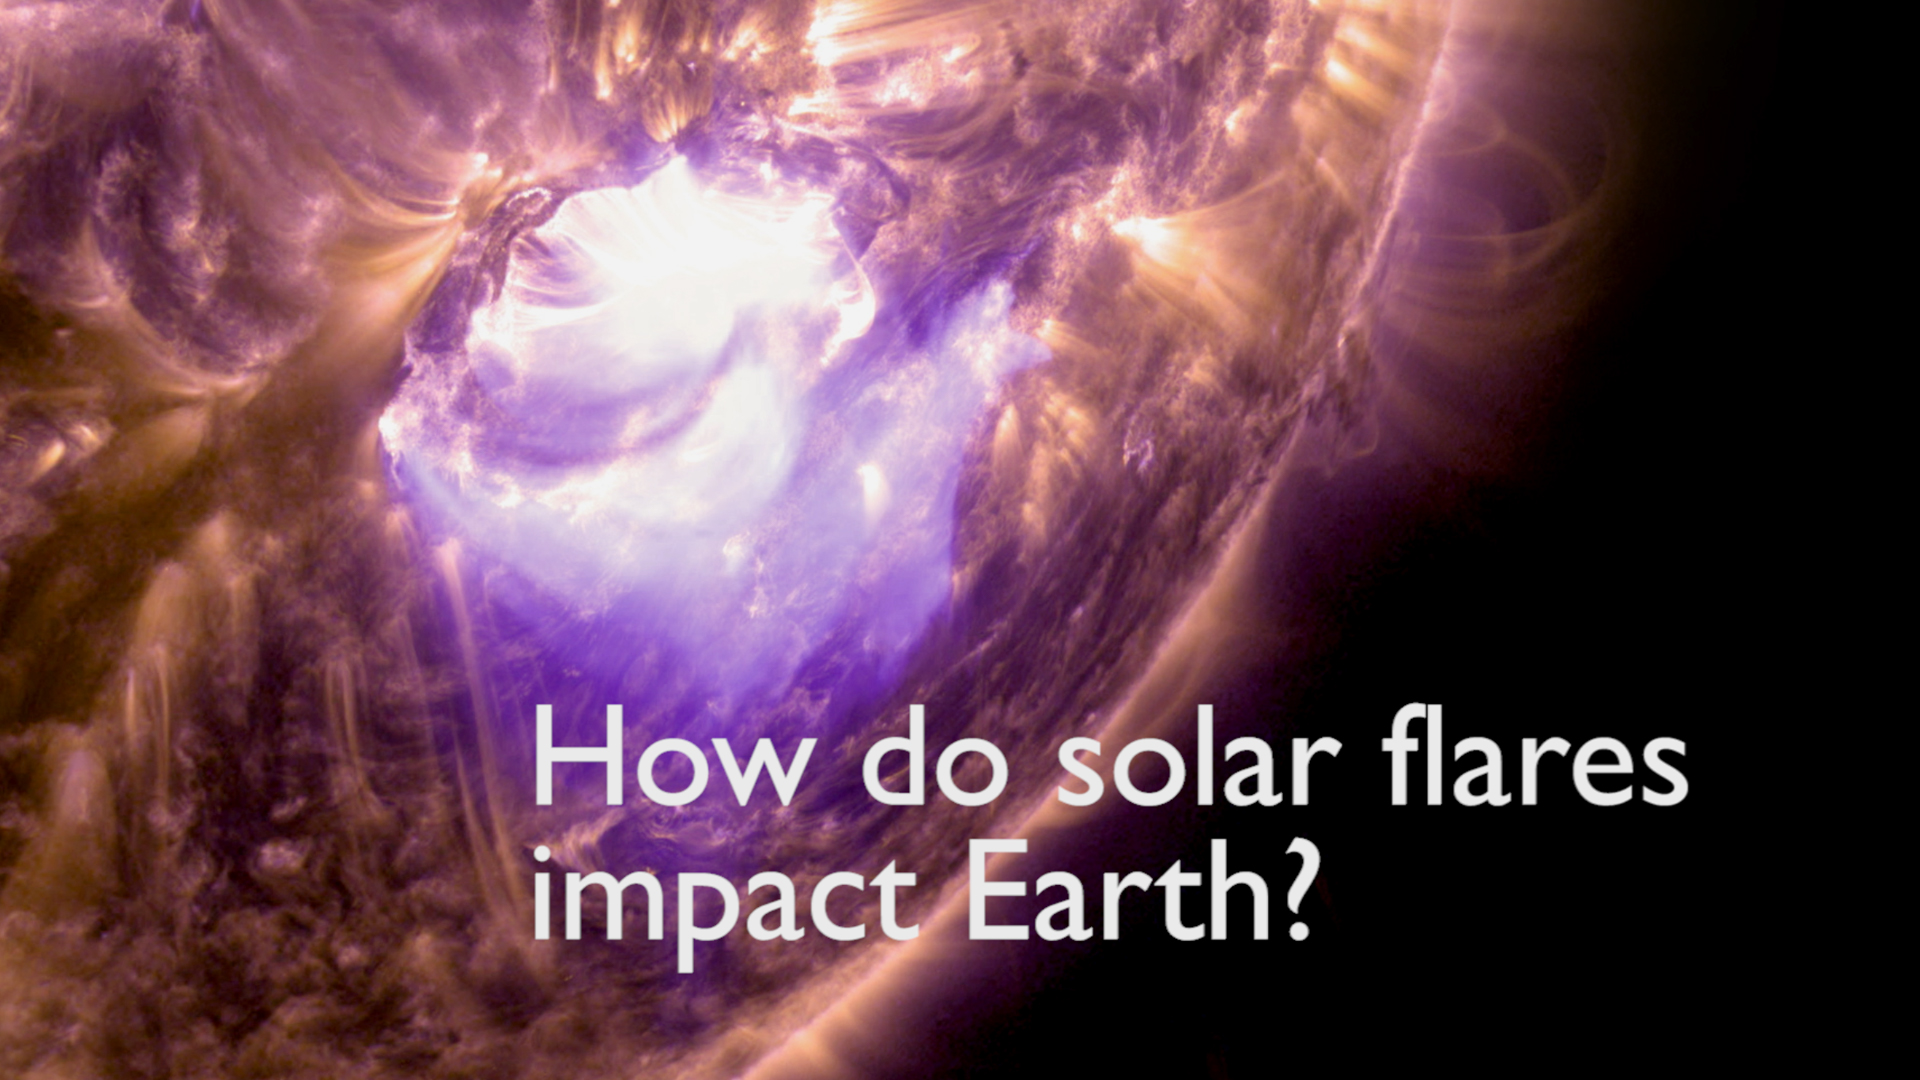 A team of scientists —led by Laura Hayes, a solar physicist who splits her time between NASA Goddard and Trinity College in Dublin, Ireland— investigated a connection between solar flares and Earth’s atmosphere. They discovered pulses in the electrified layer of the atmosphere—called the ionosphere—mirrored X-ray oscillations during a July 24, 2016 flare. Music: "Good Chat" by Richard Anthony D Pike on Killer TracksWatch this video on the NASA Goddard YouTube channel.Complete transcript available.